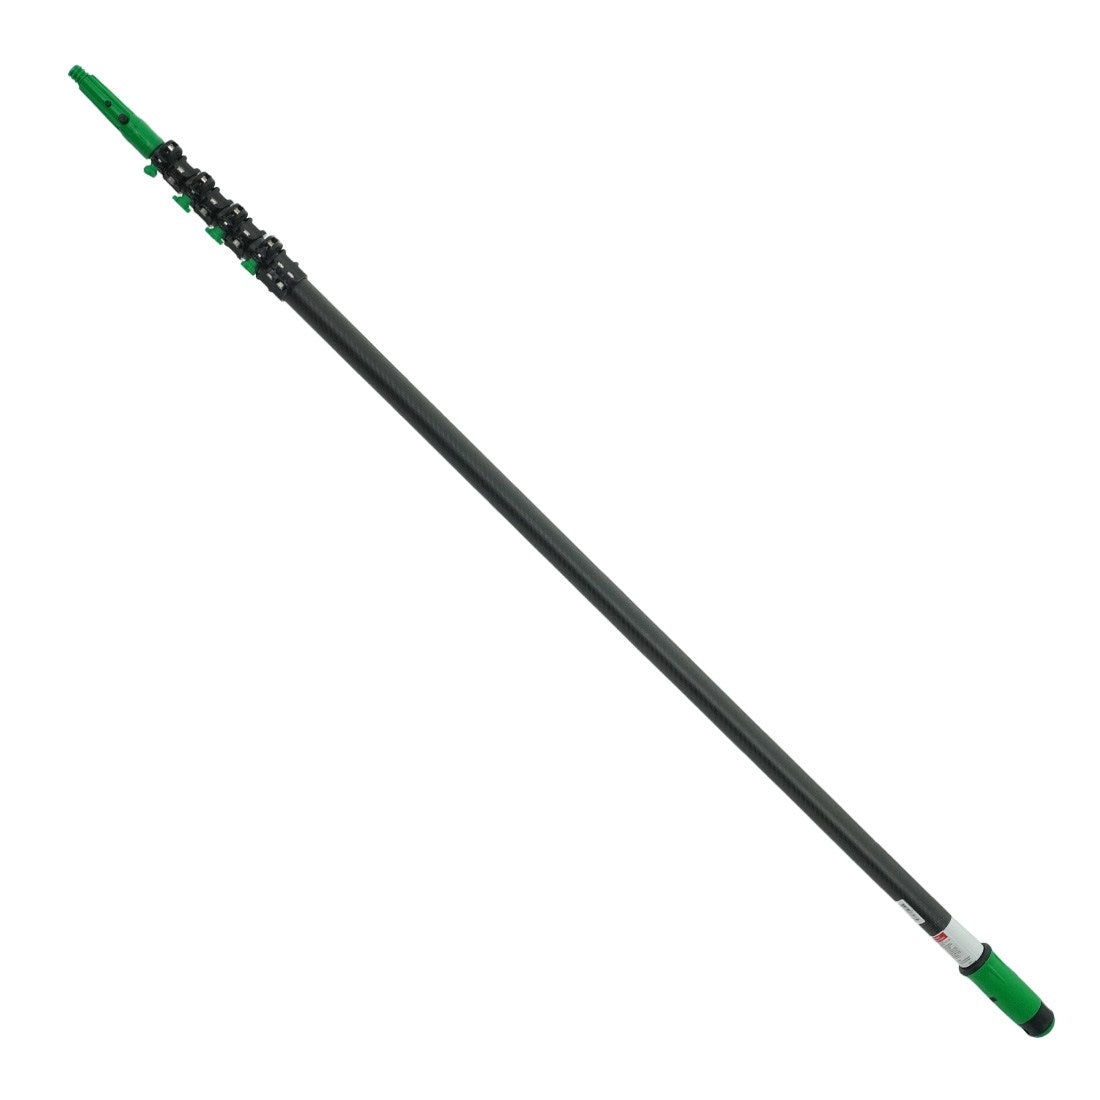 Unger Carbon Trad Pole 20 Foot View